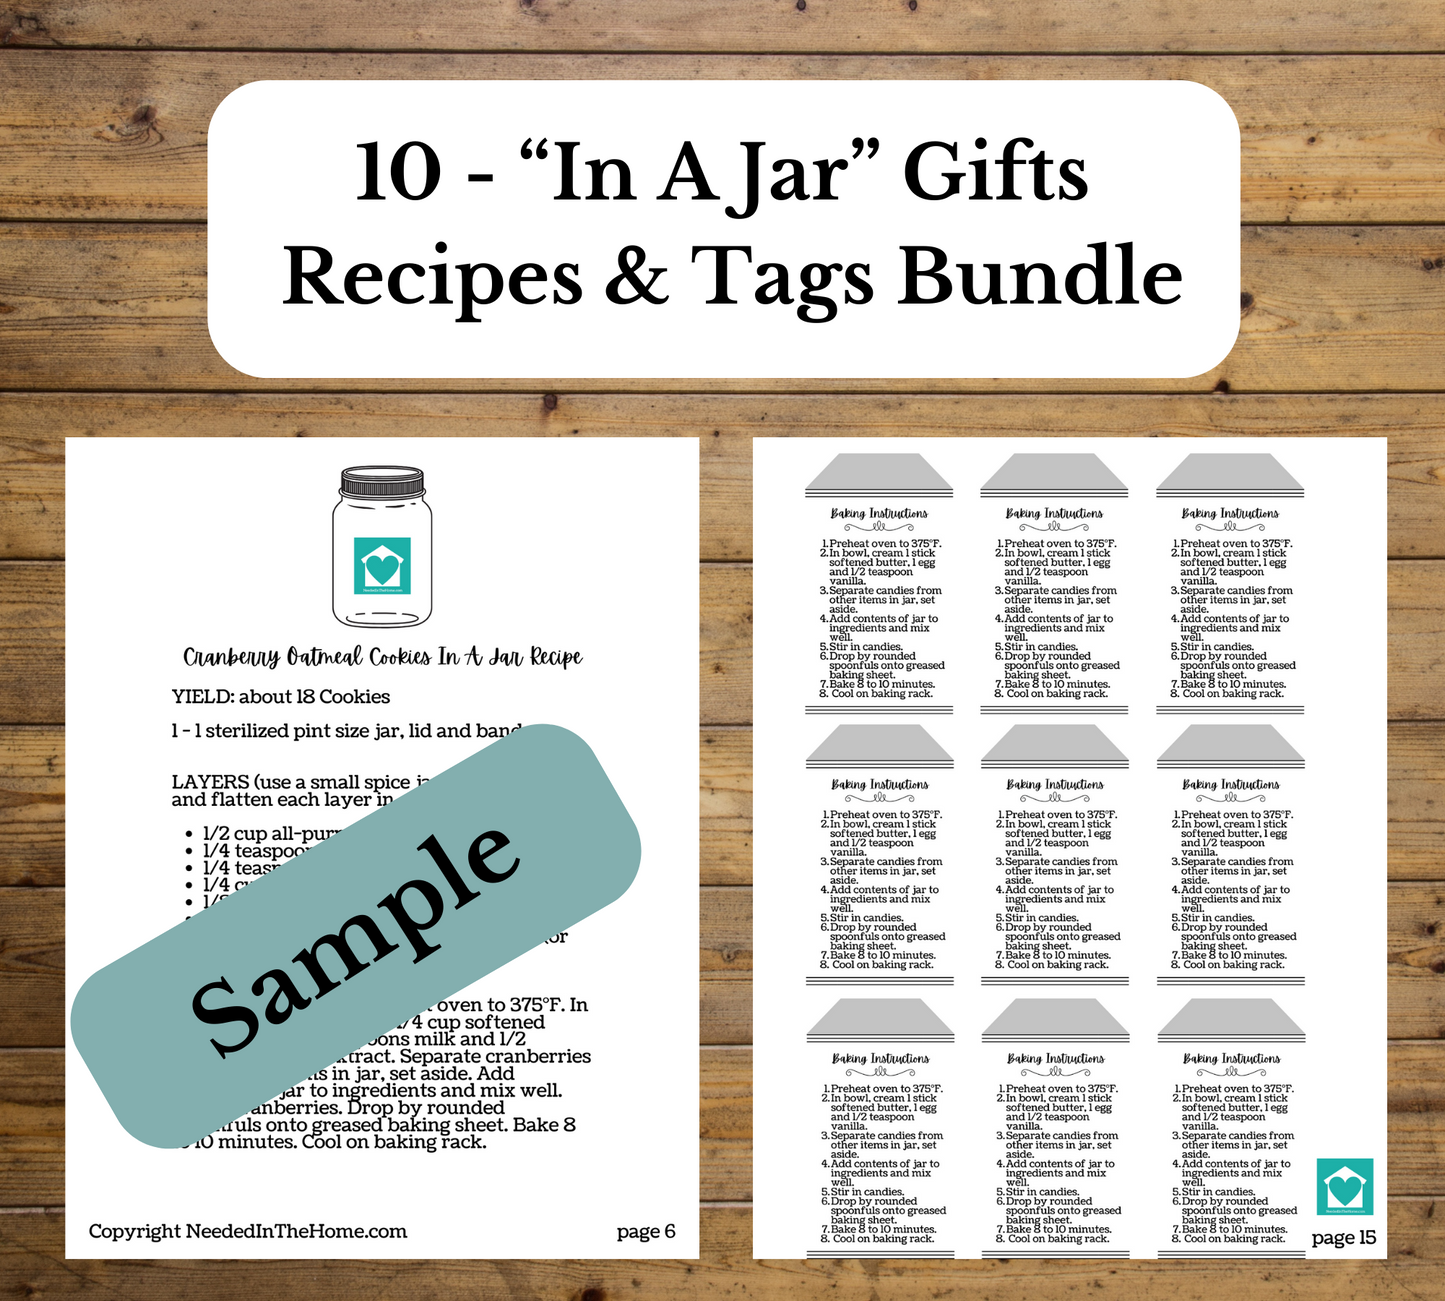 Mason Jar Gift Ideas / 10 In A Jar Gifts Recipes and Tags Bundle